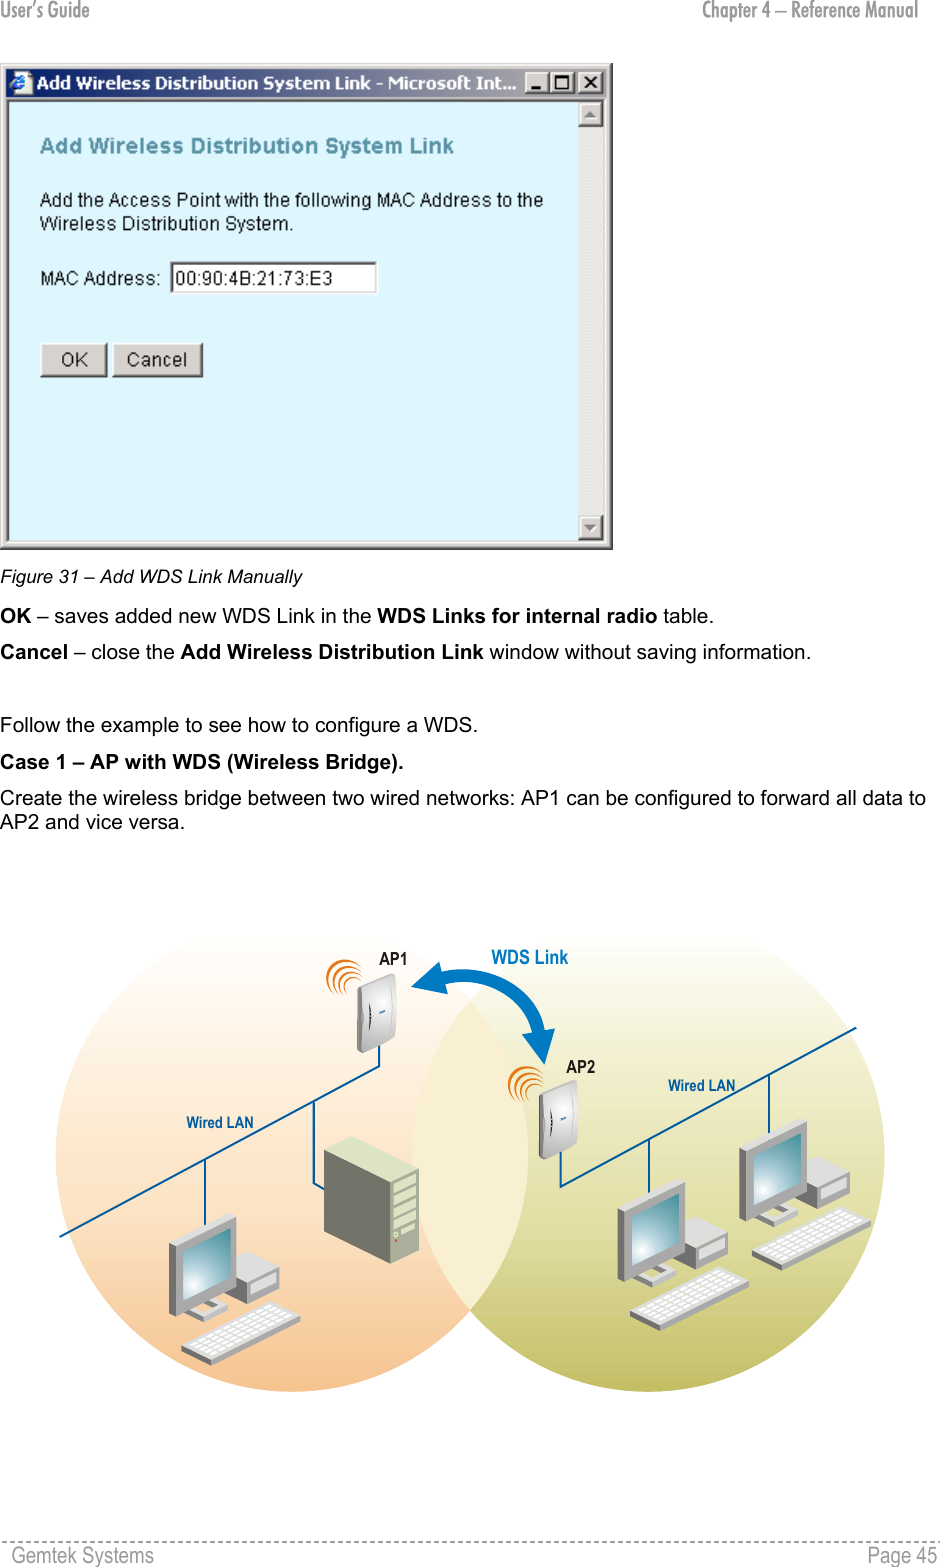 User’s Guide  Chapter 4 – Reference Manual  Figure 31 – Add WDS Link Manually OK – saves added new WDS Link in the WDS Links for internal radio table. Cancel – close the Add Wireless Distribution Link window without saving information.  Follow the example to see how to configure a WDS. Case 1 – AP with WDS (Wireless Bridge).  Create the wireless bridge between two wired networks: AP1 can be configured to forward all data to AP2 and vice versa.  AP2WDS LinkAP1Wired LANWired LAN Gemtek Systems    Page 45  